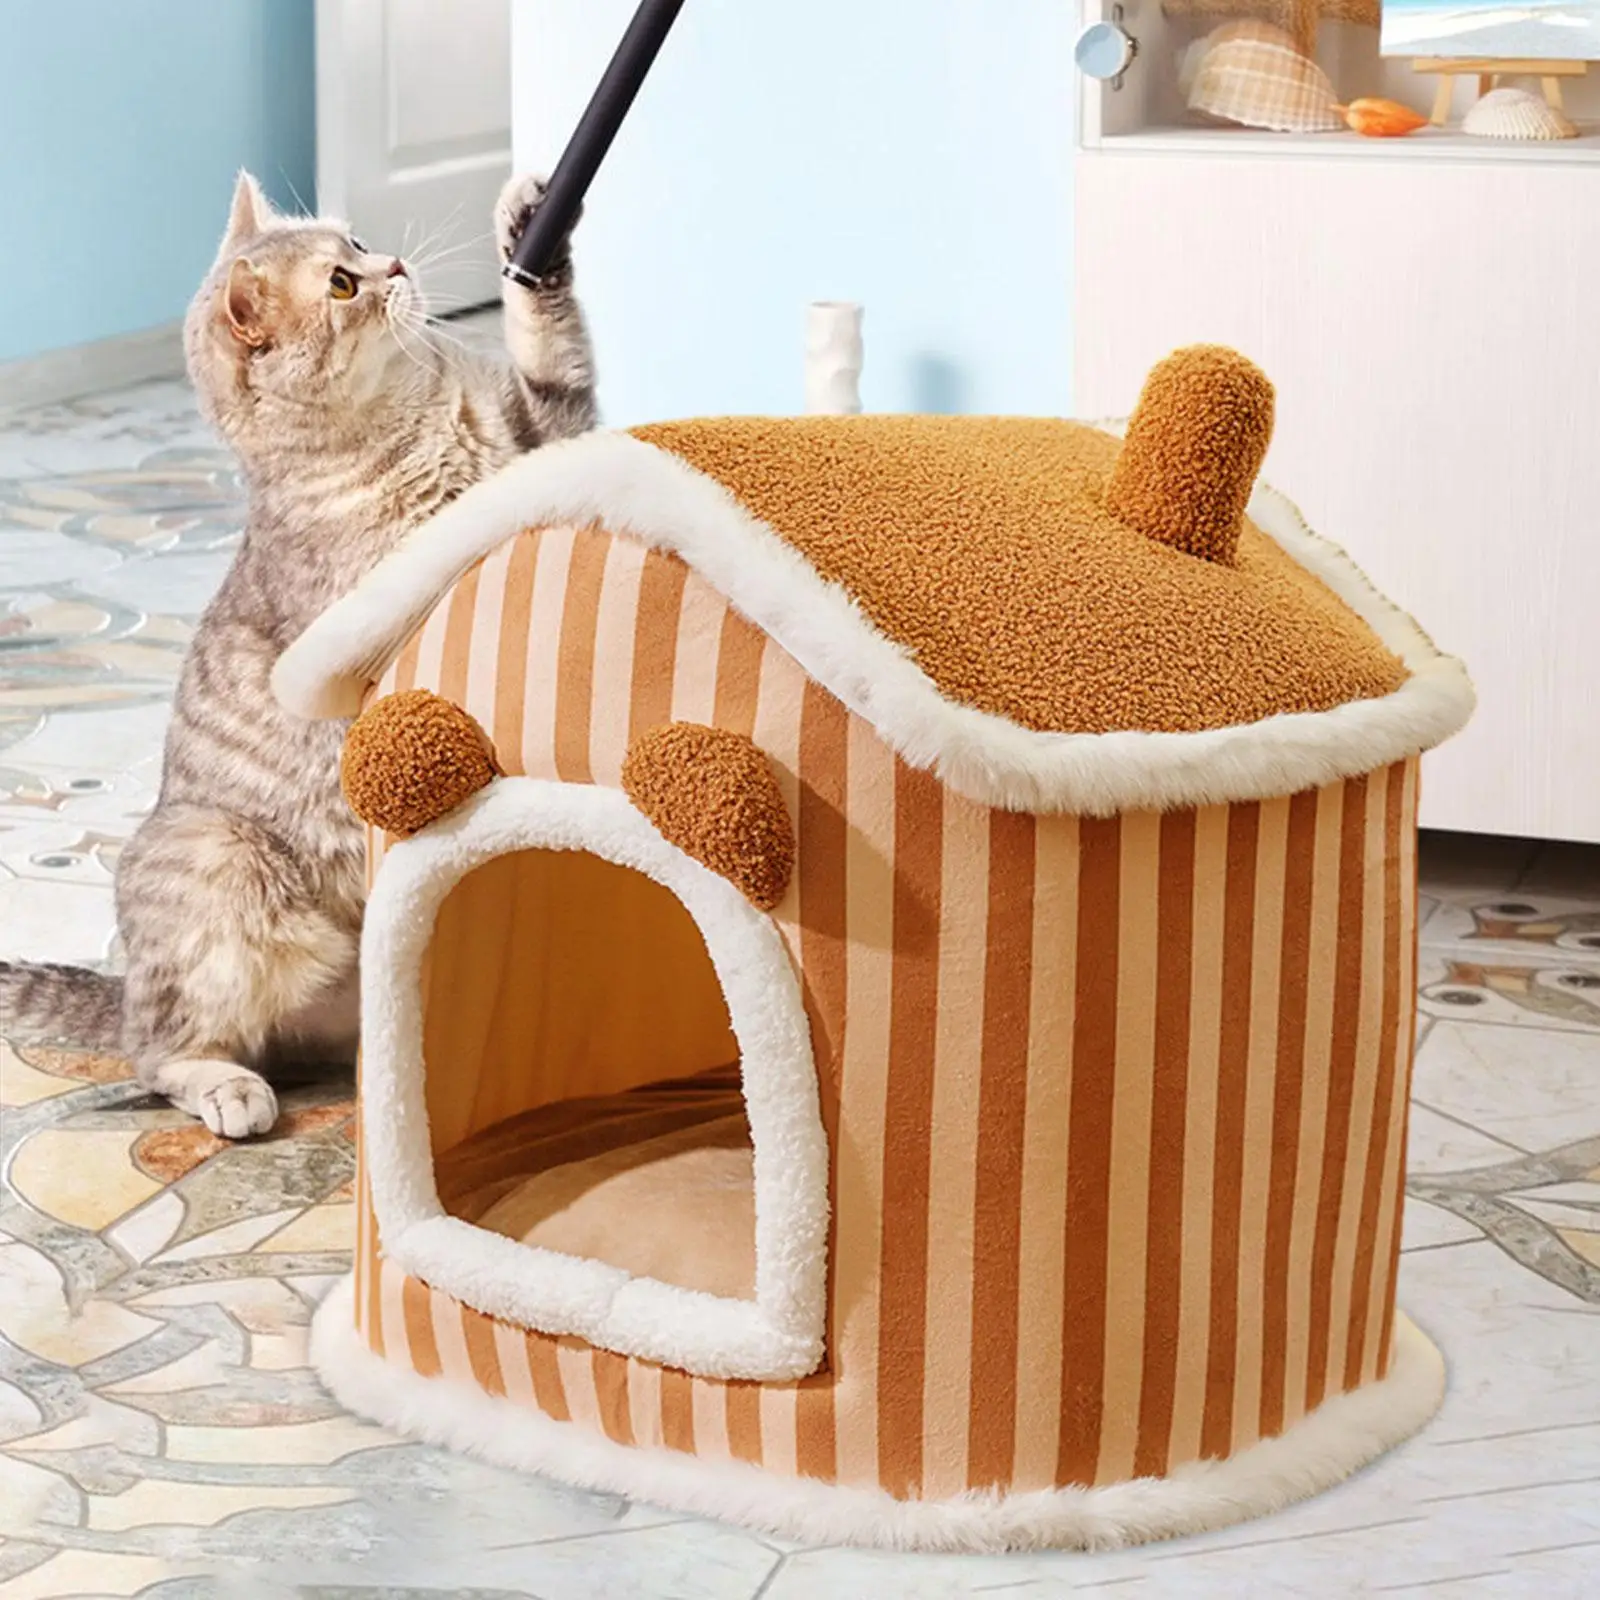 Lovely Cat Bed House Warm Removable Pet Cushion Indoor Cats Soft Cats Tent Anti Slip Bottom Kitten Kitty Shelter Huts Pet Bed